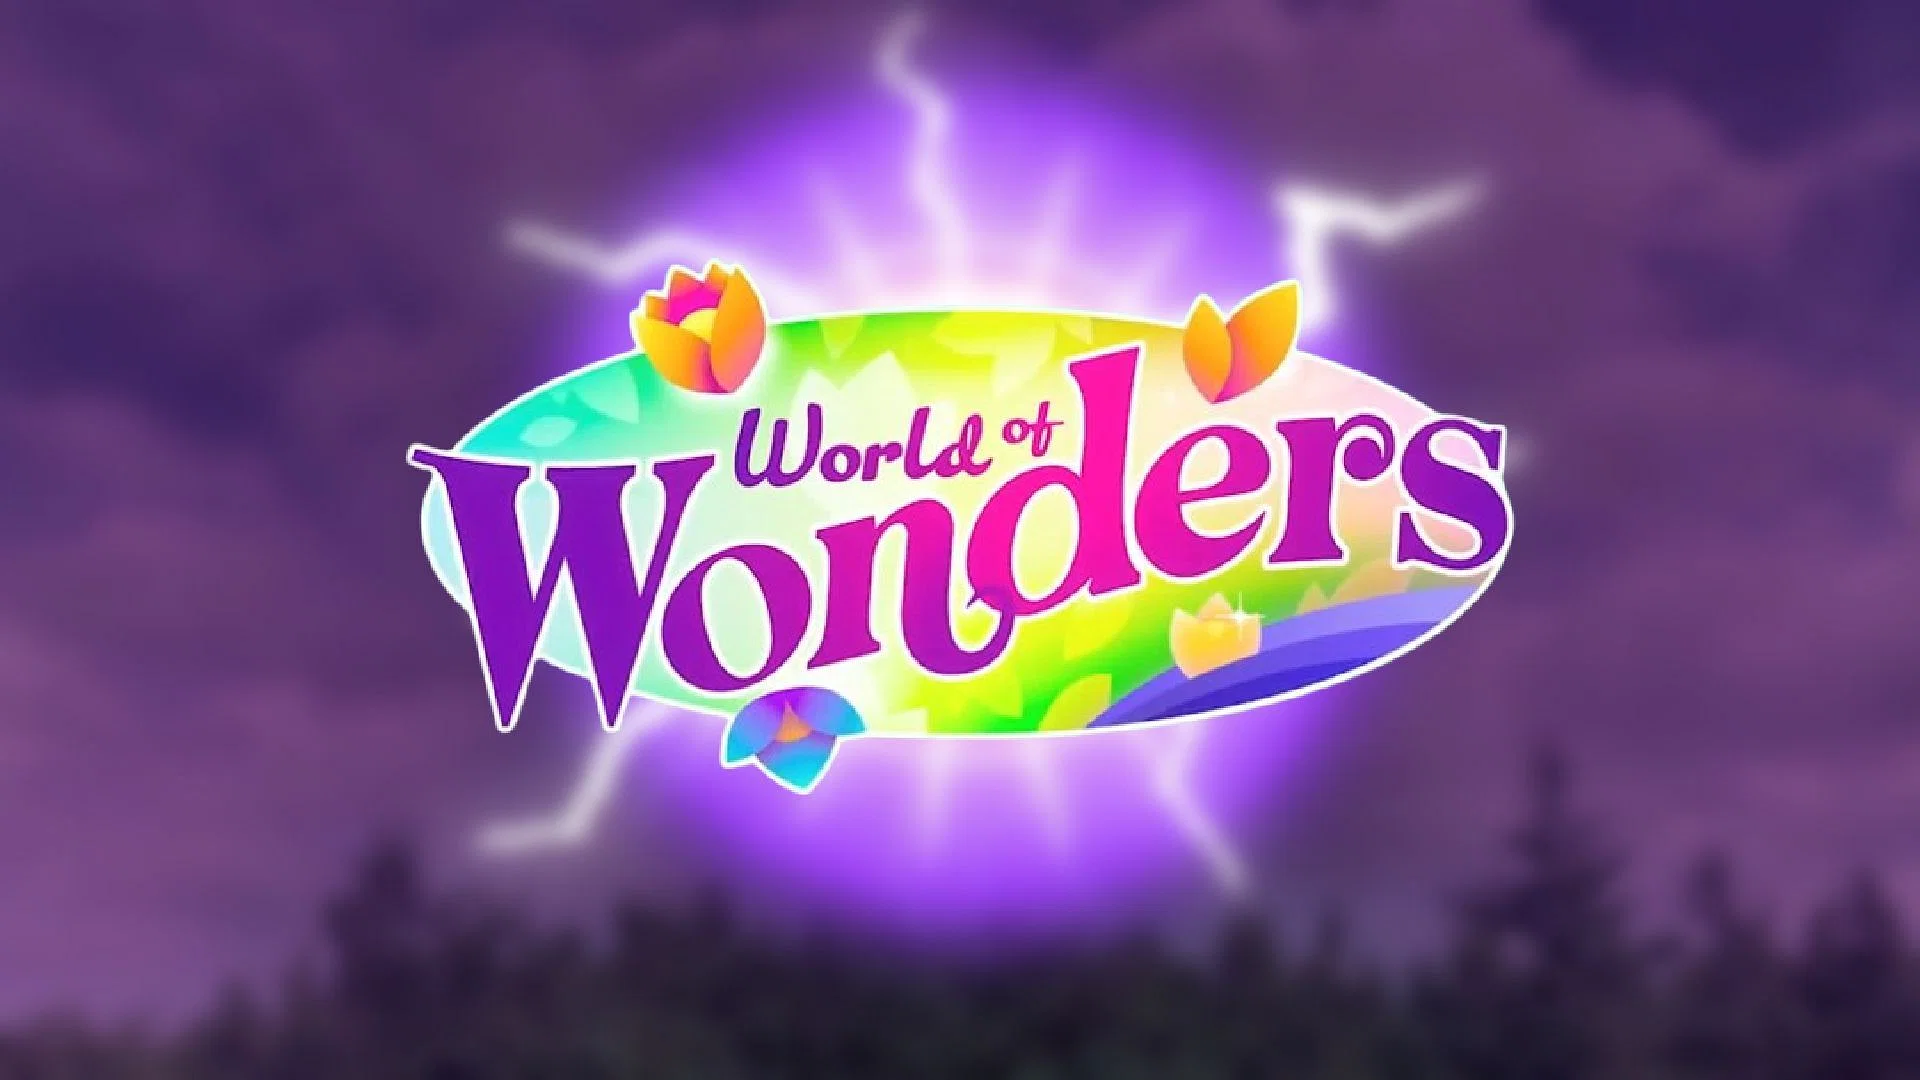 Pokémon GO Welcomes Poipole in the World of Wonders Season